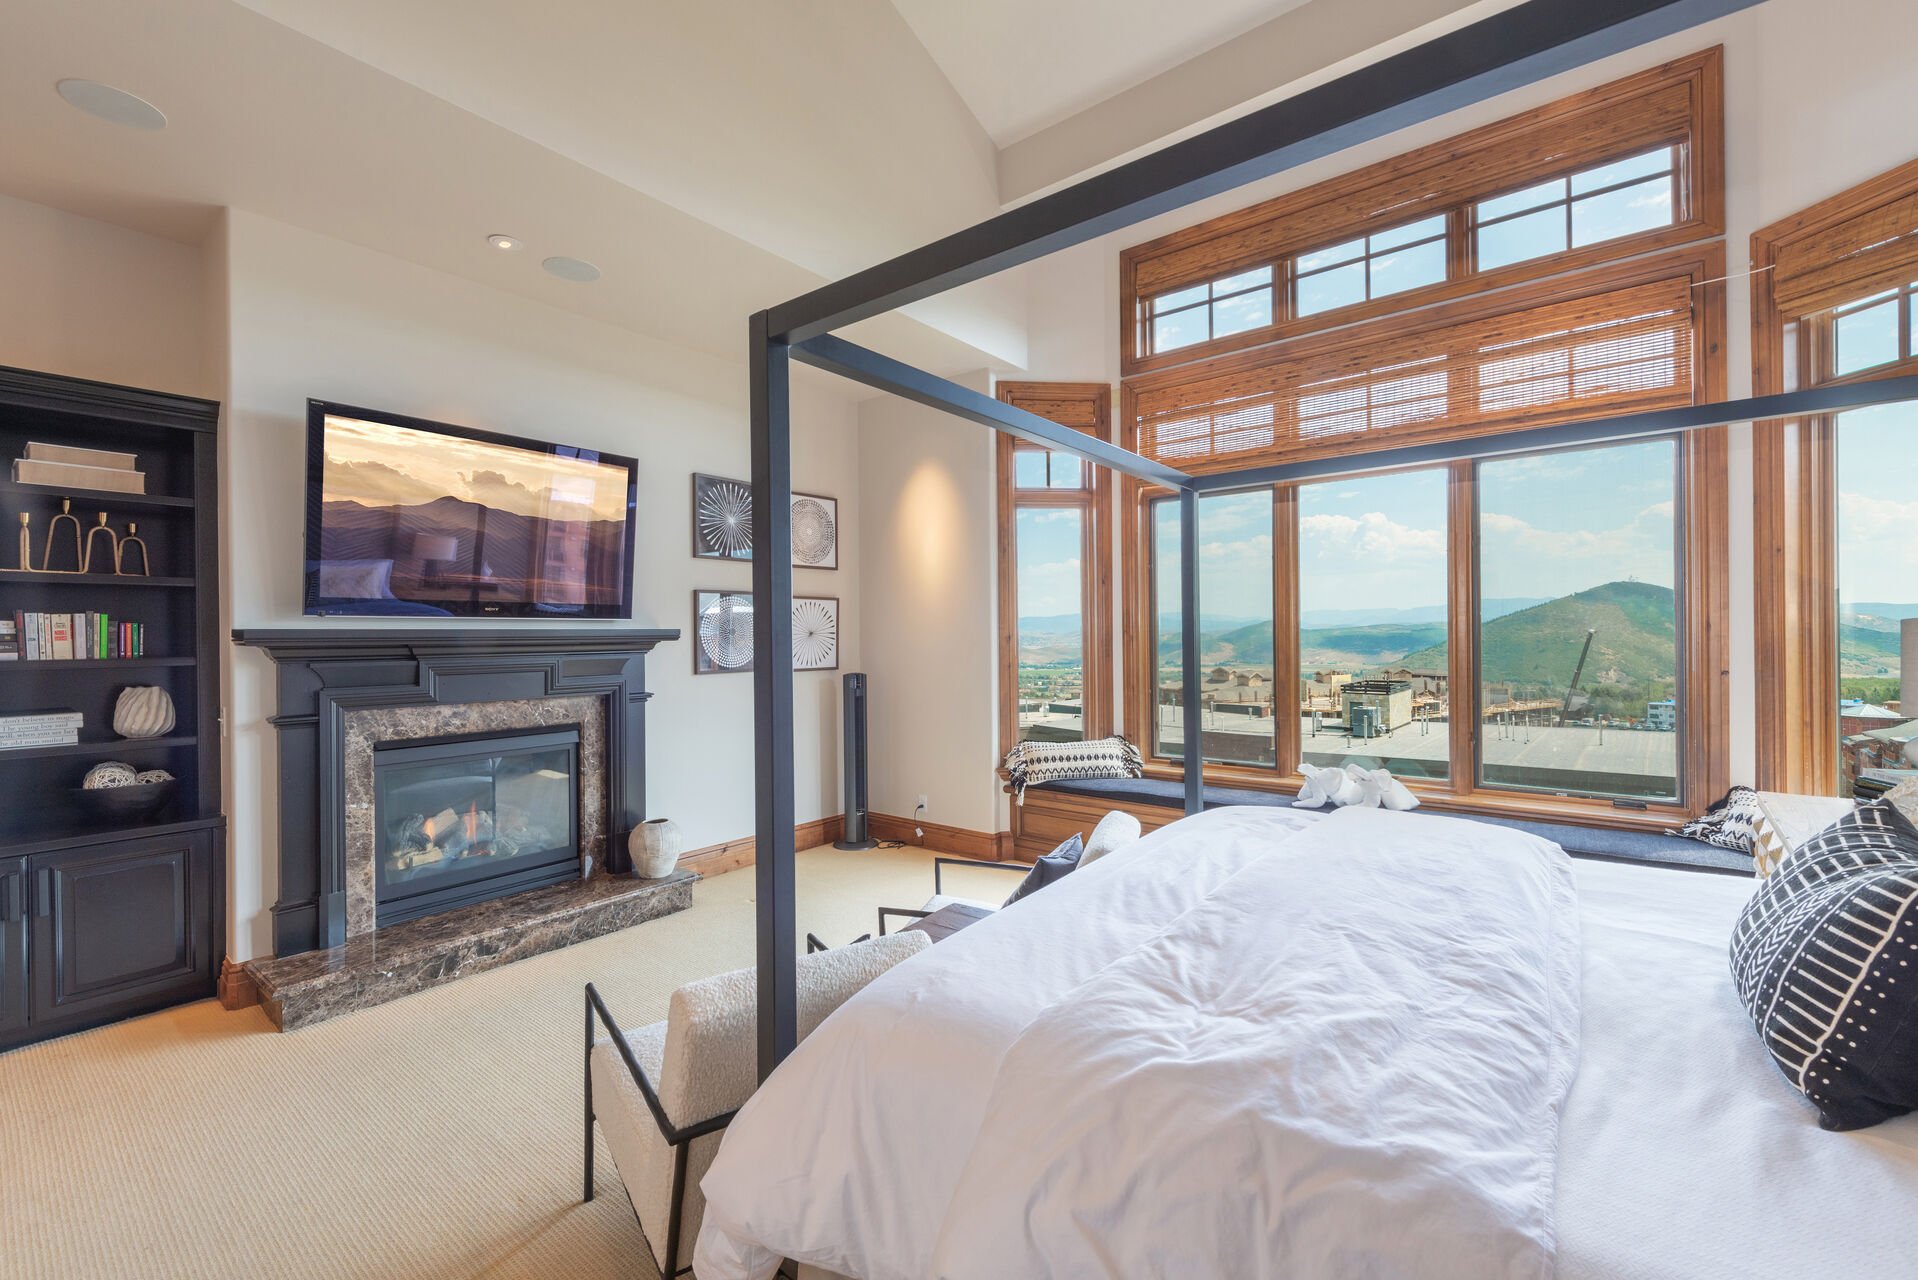 Master bedroom ensuite bathroom with gas fireplace and sweeping valley views.